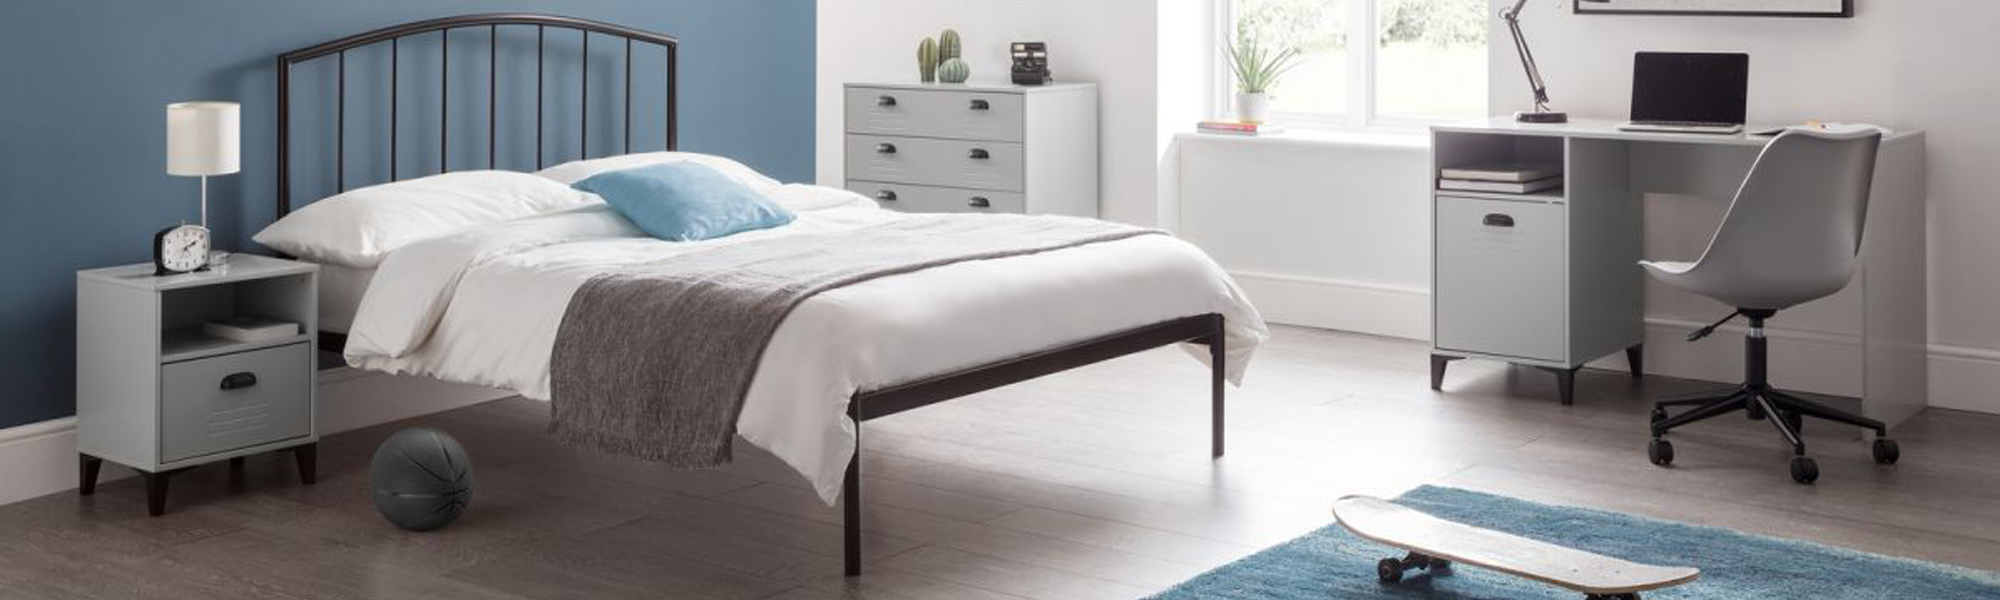 Small Double Metal Bedsteads